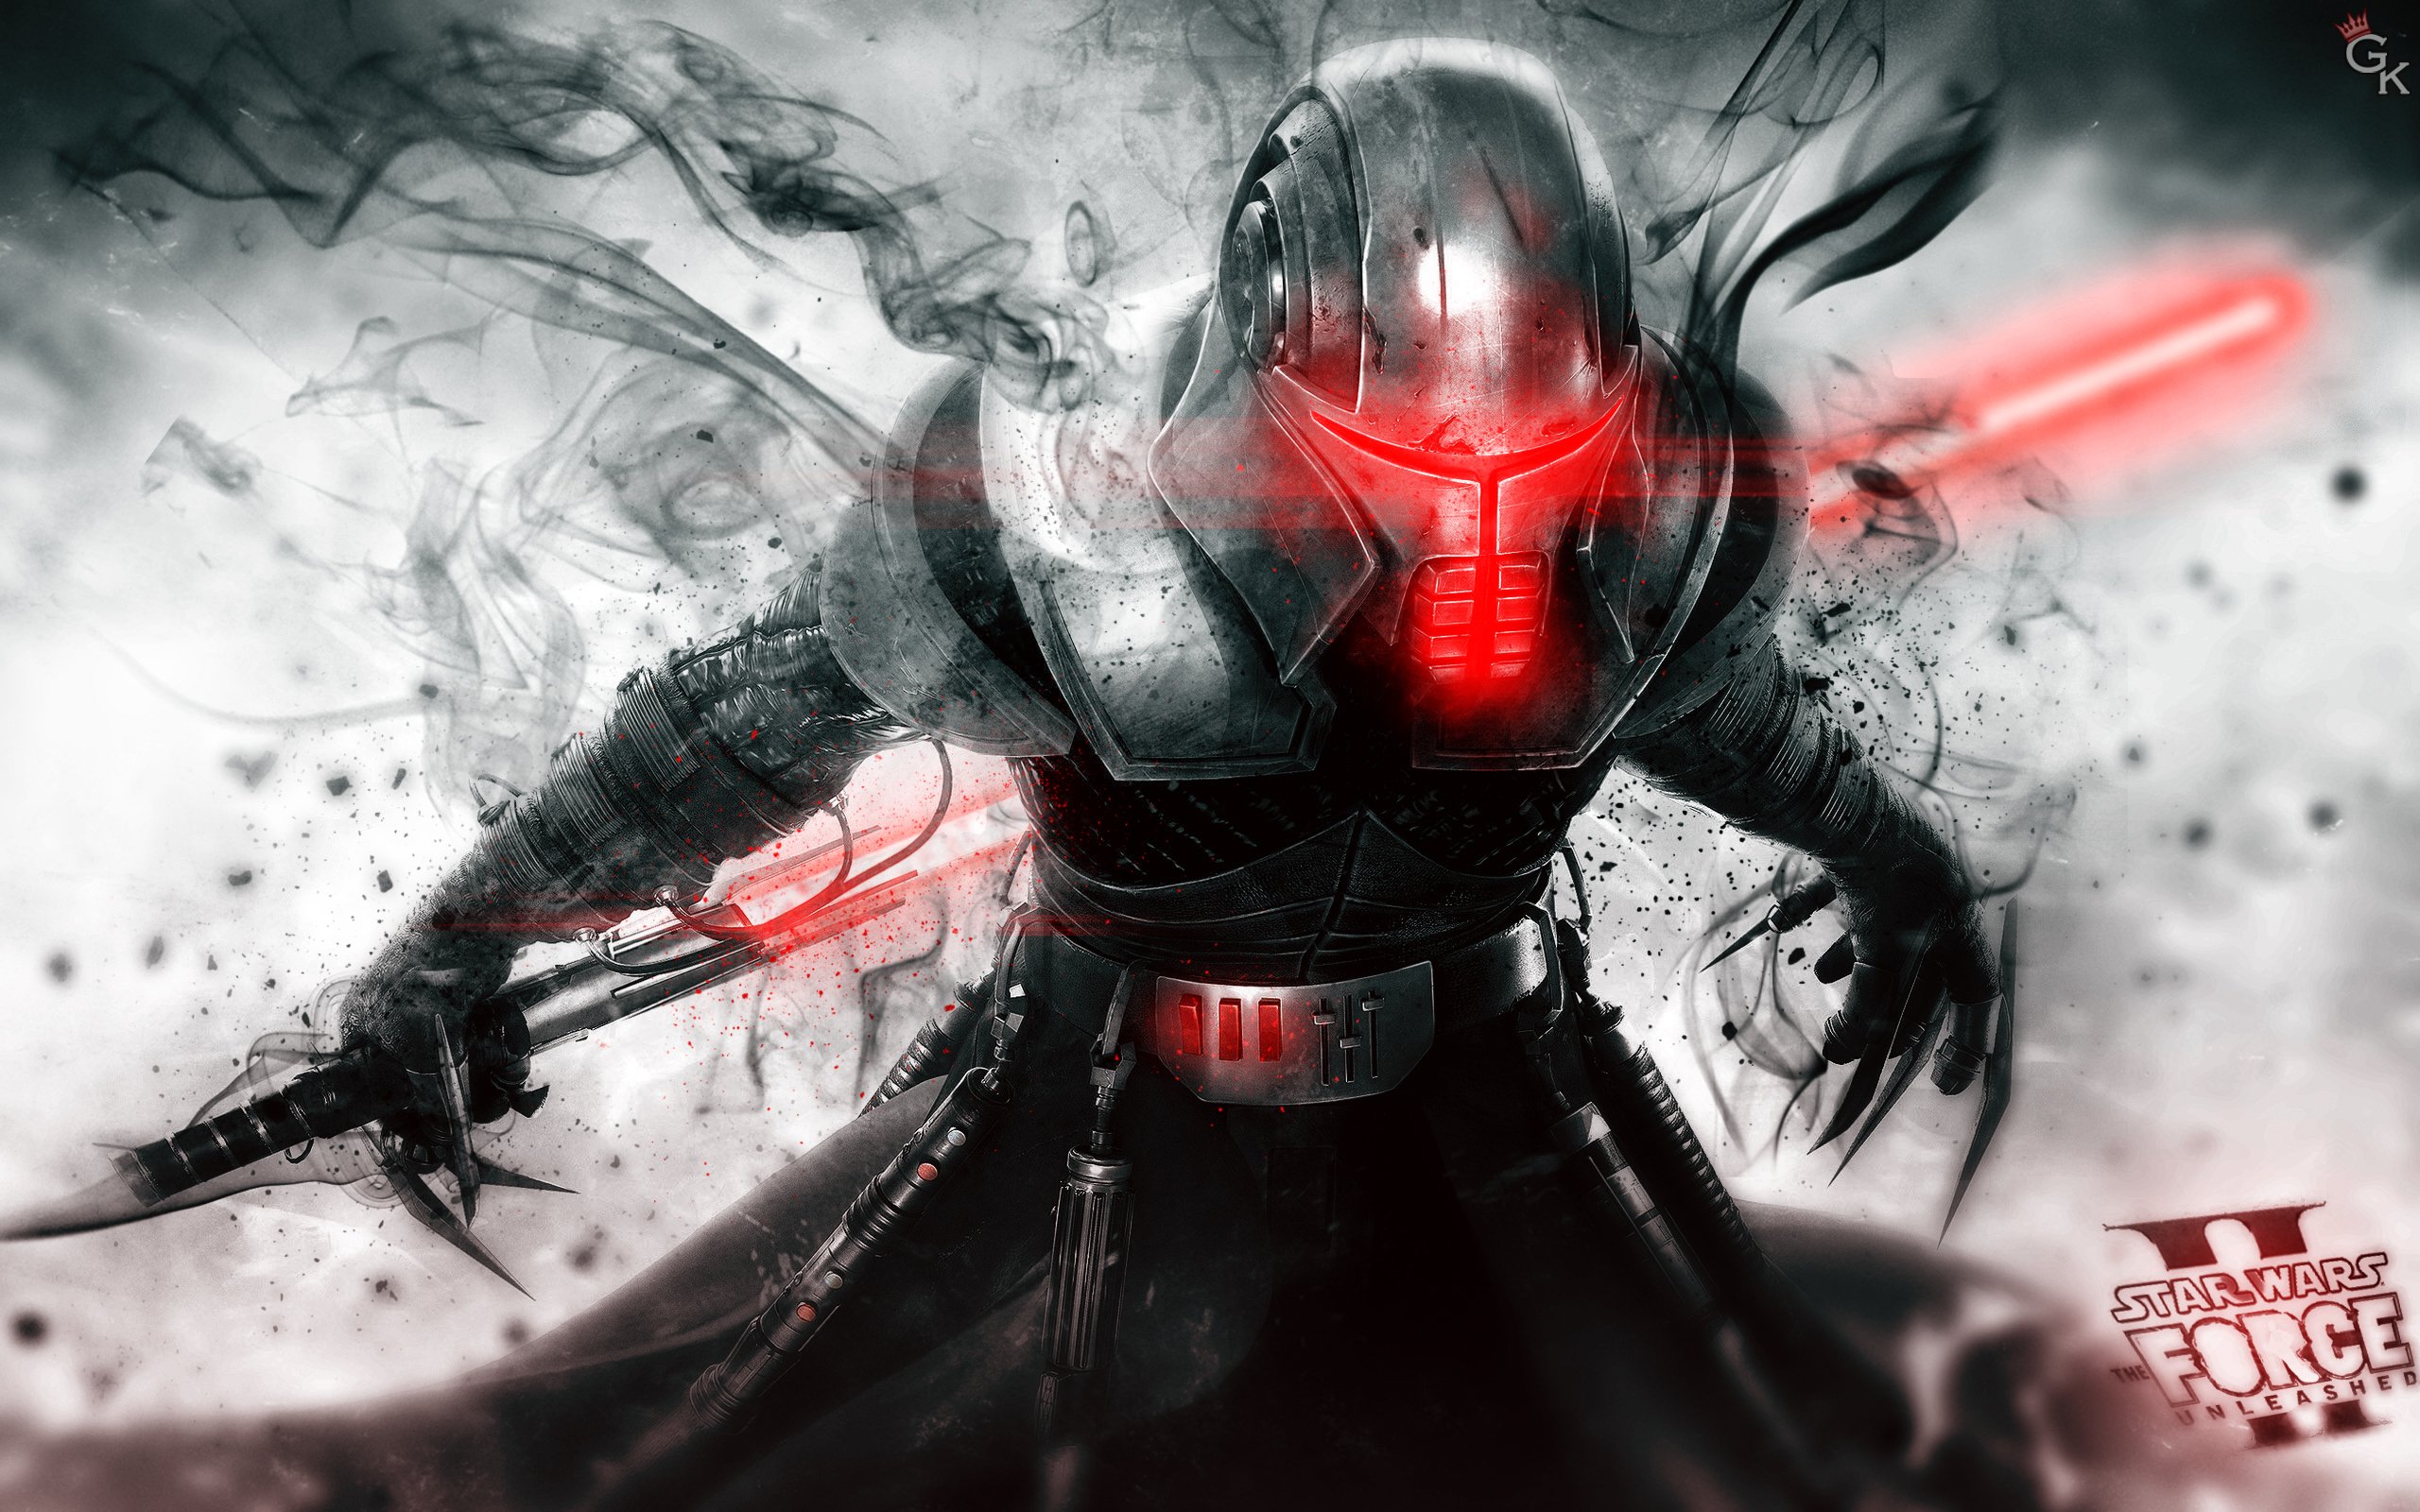 Star Wars the Force Unleashed II   Sith Lord GK by General K1MB0 on